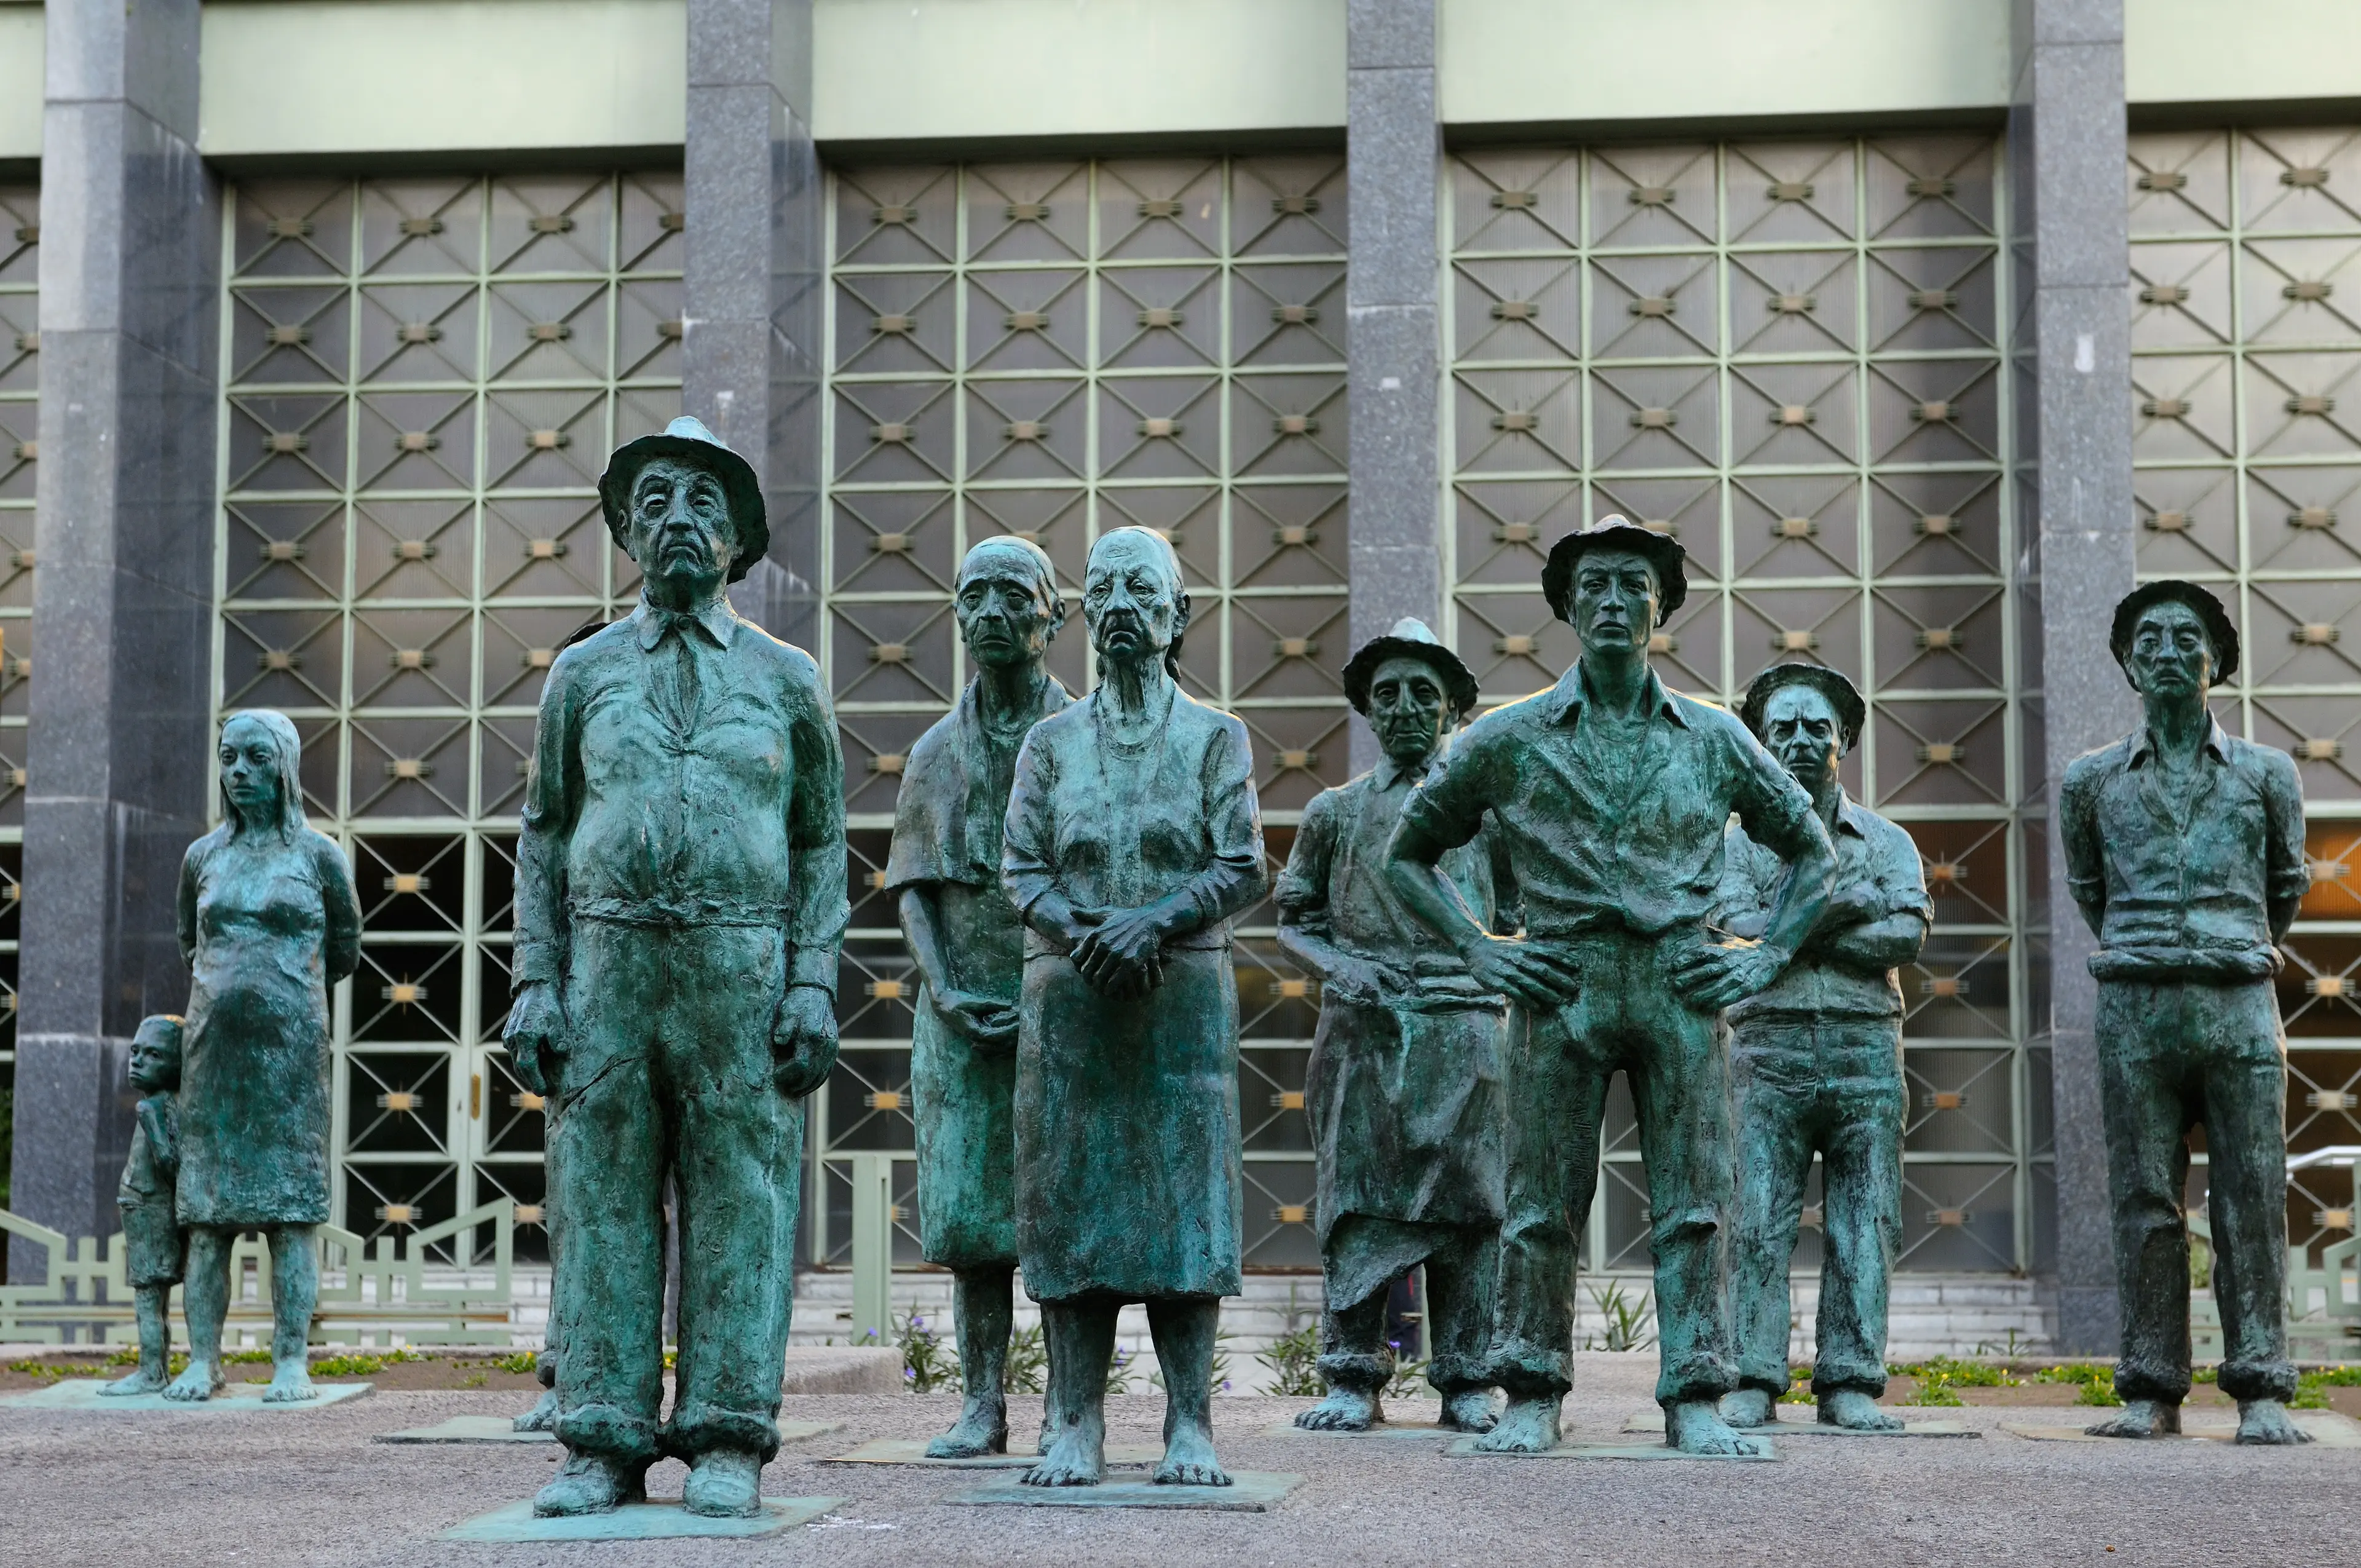 Los Presentes sculpture of Peasant farmers in front of a bank